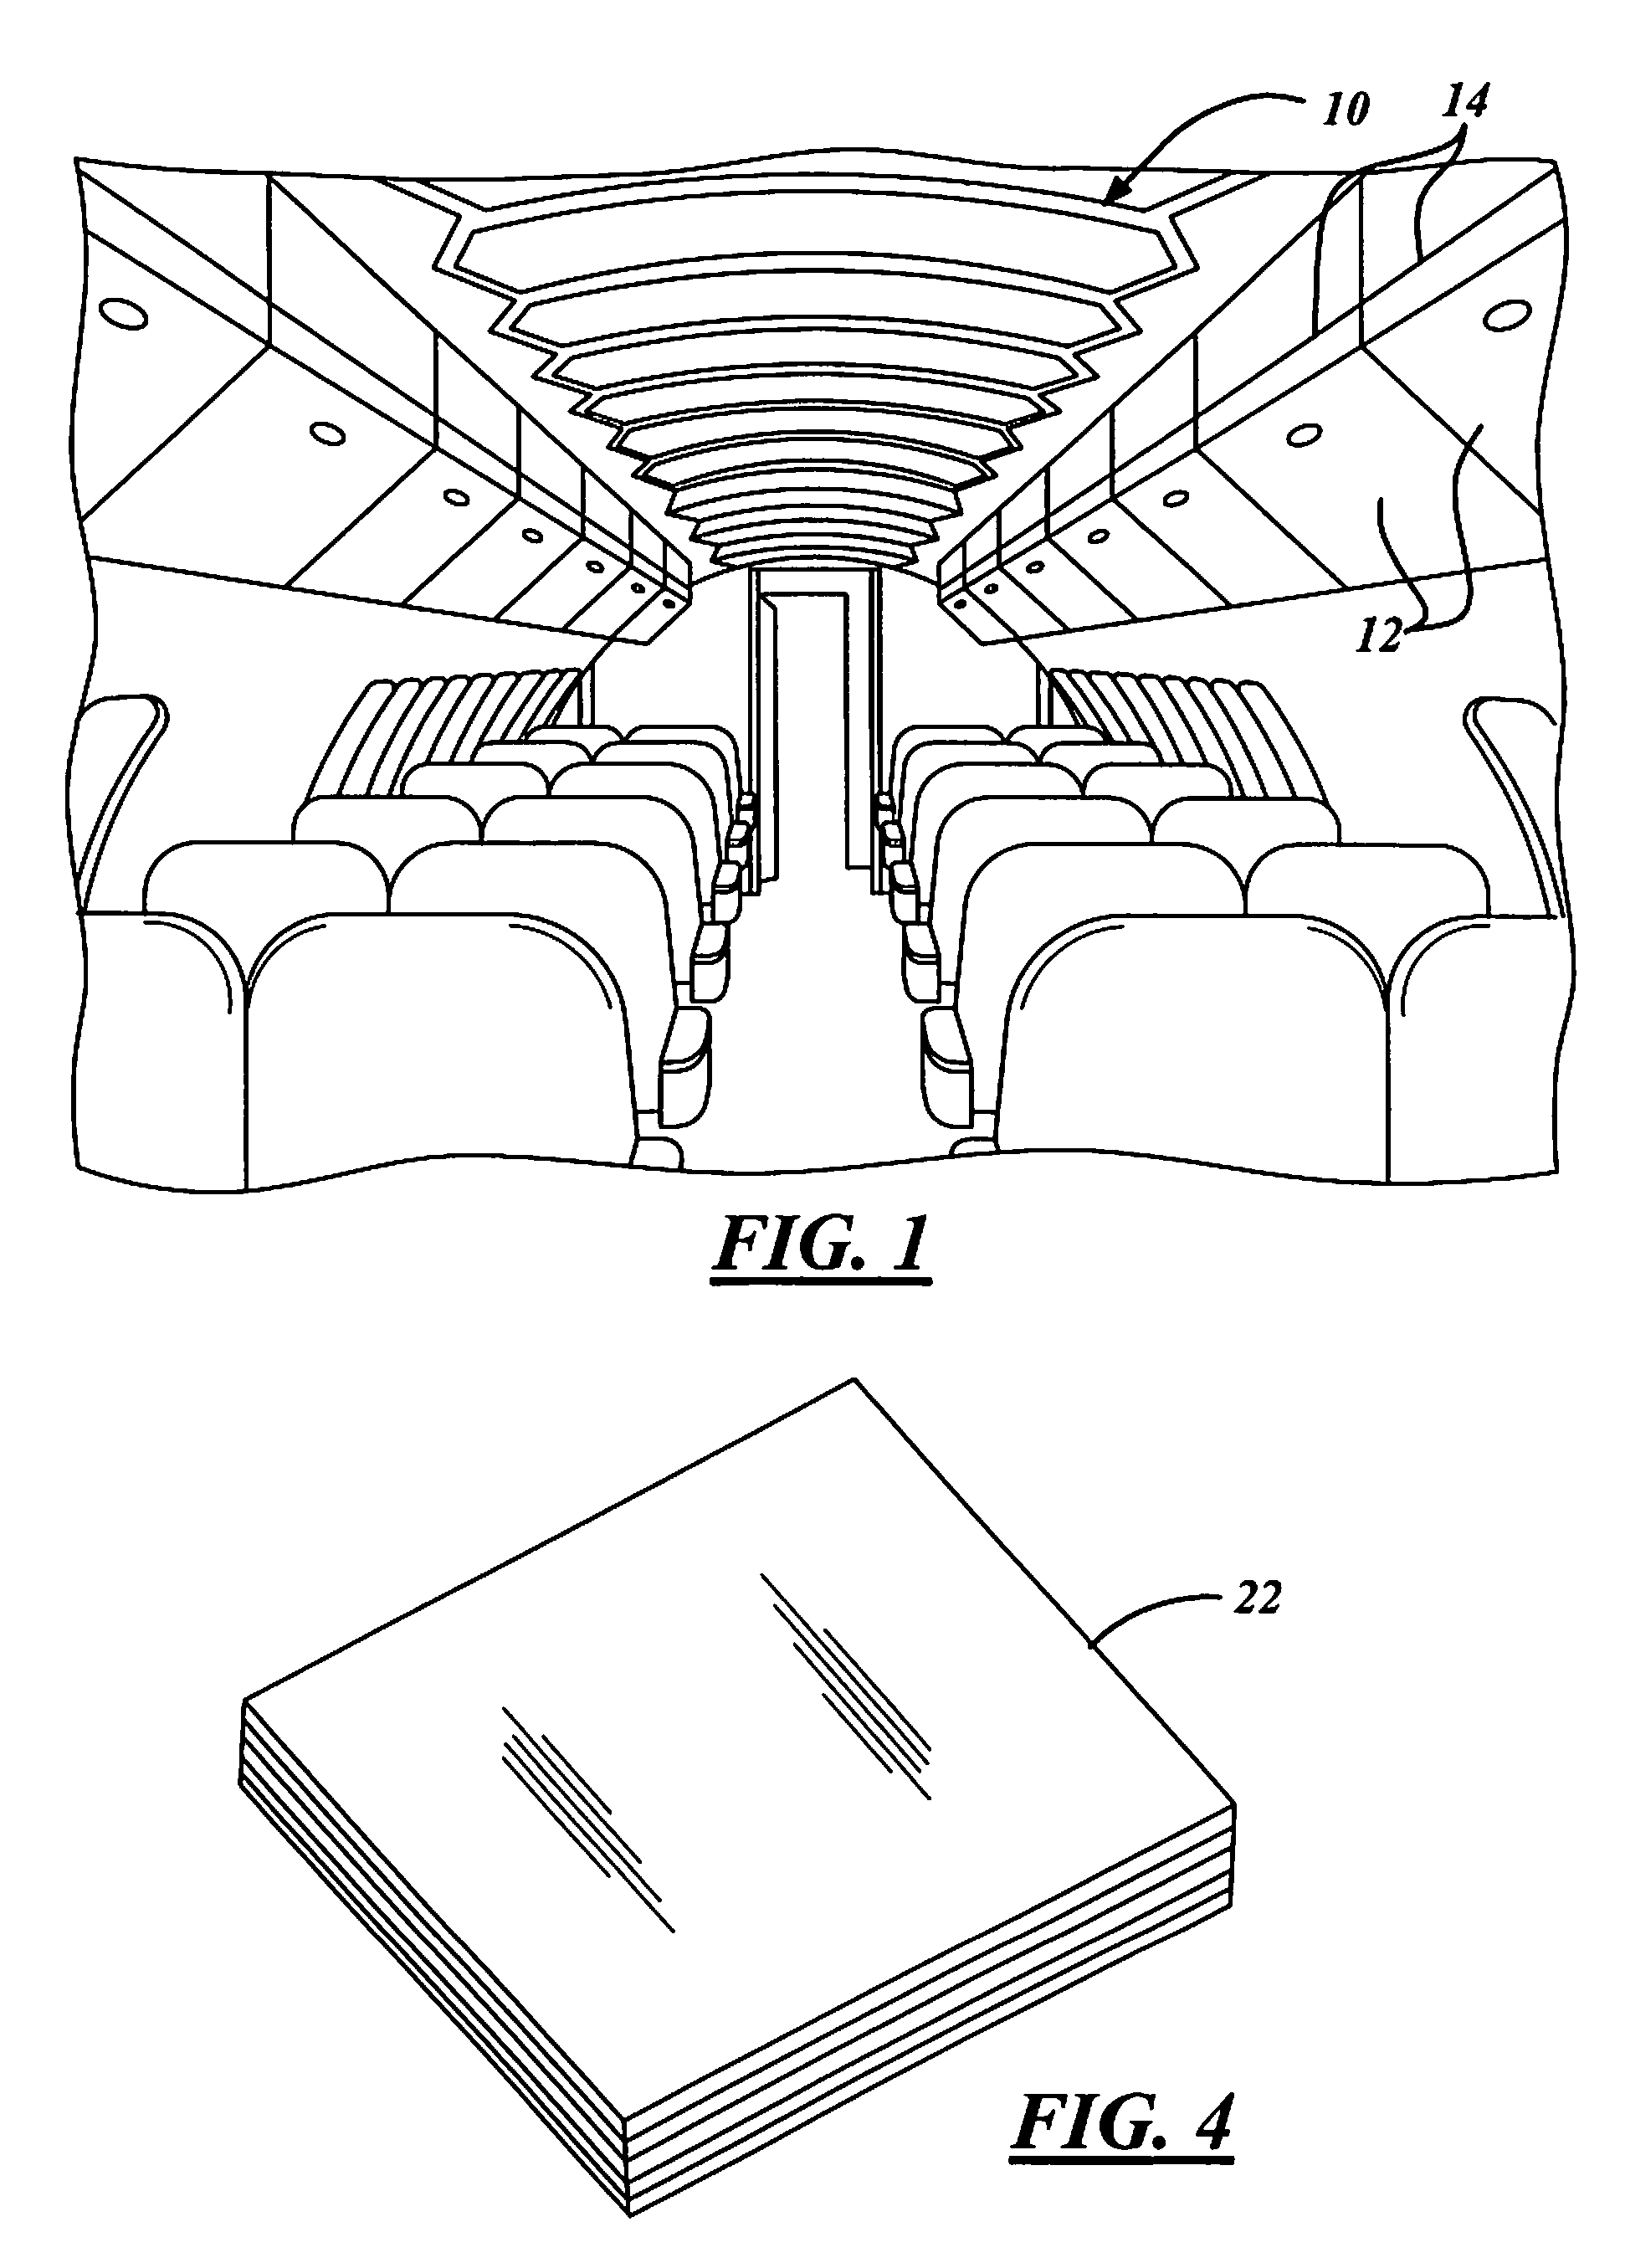 Protective cover and tool splash for vehicle components